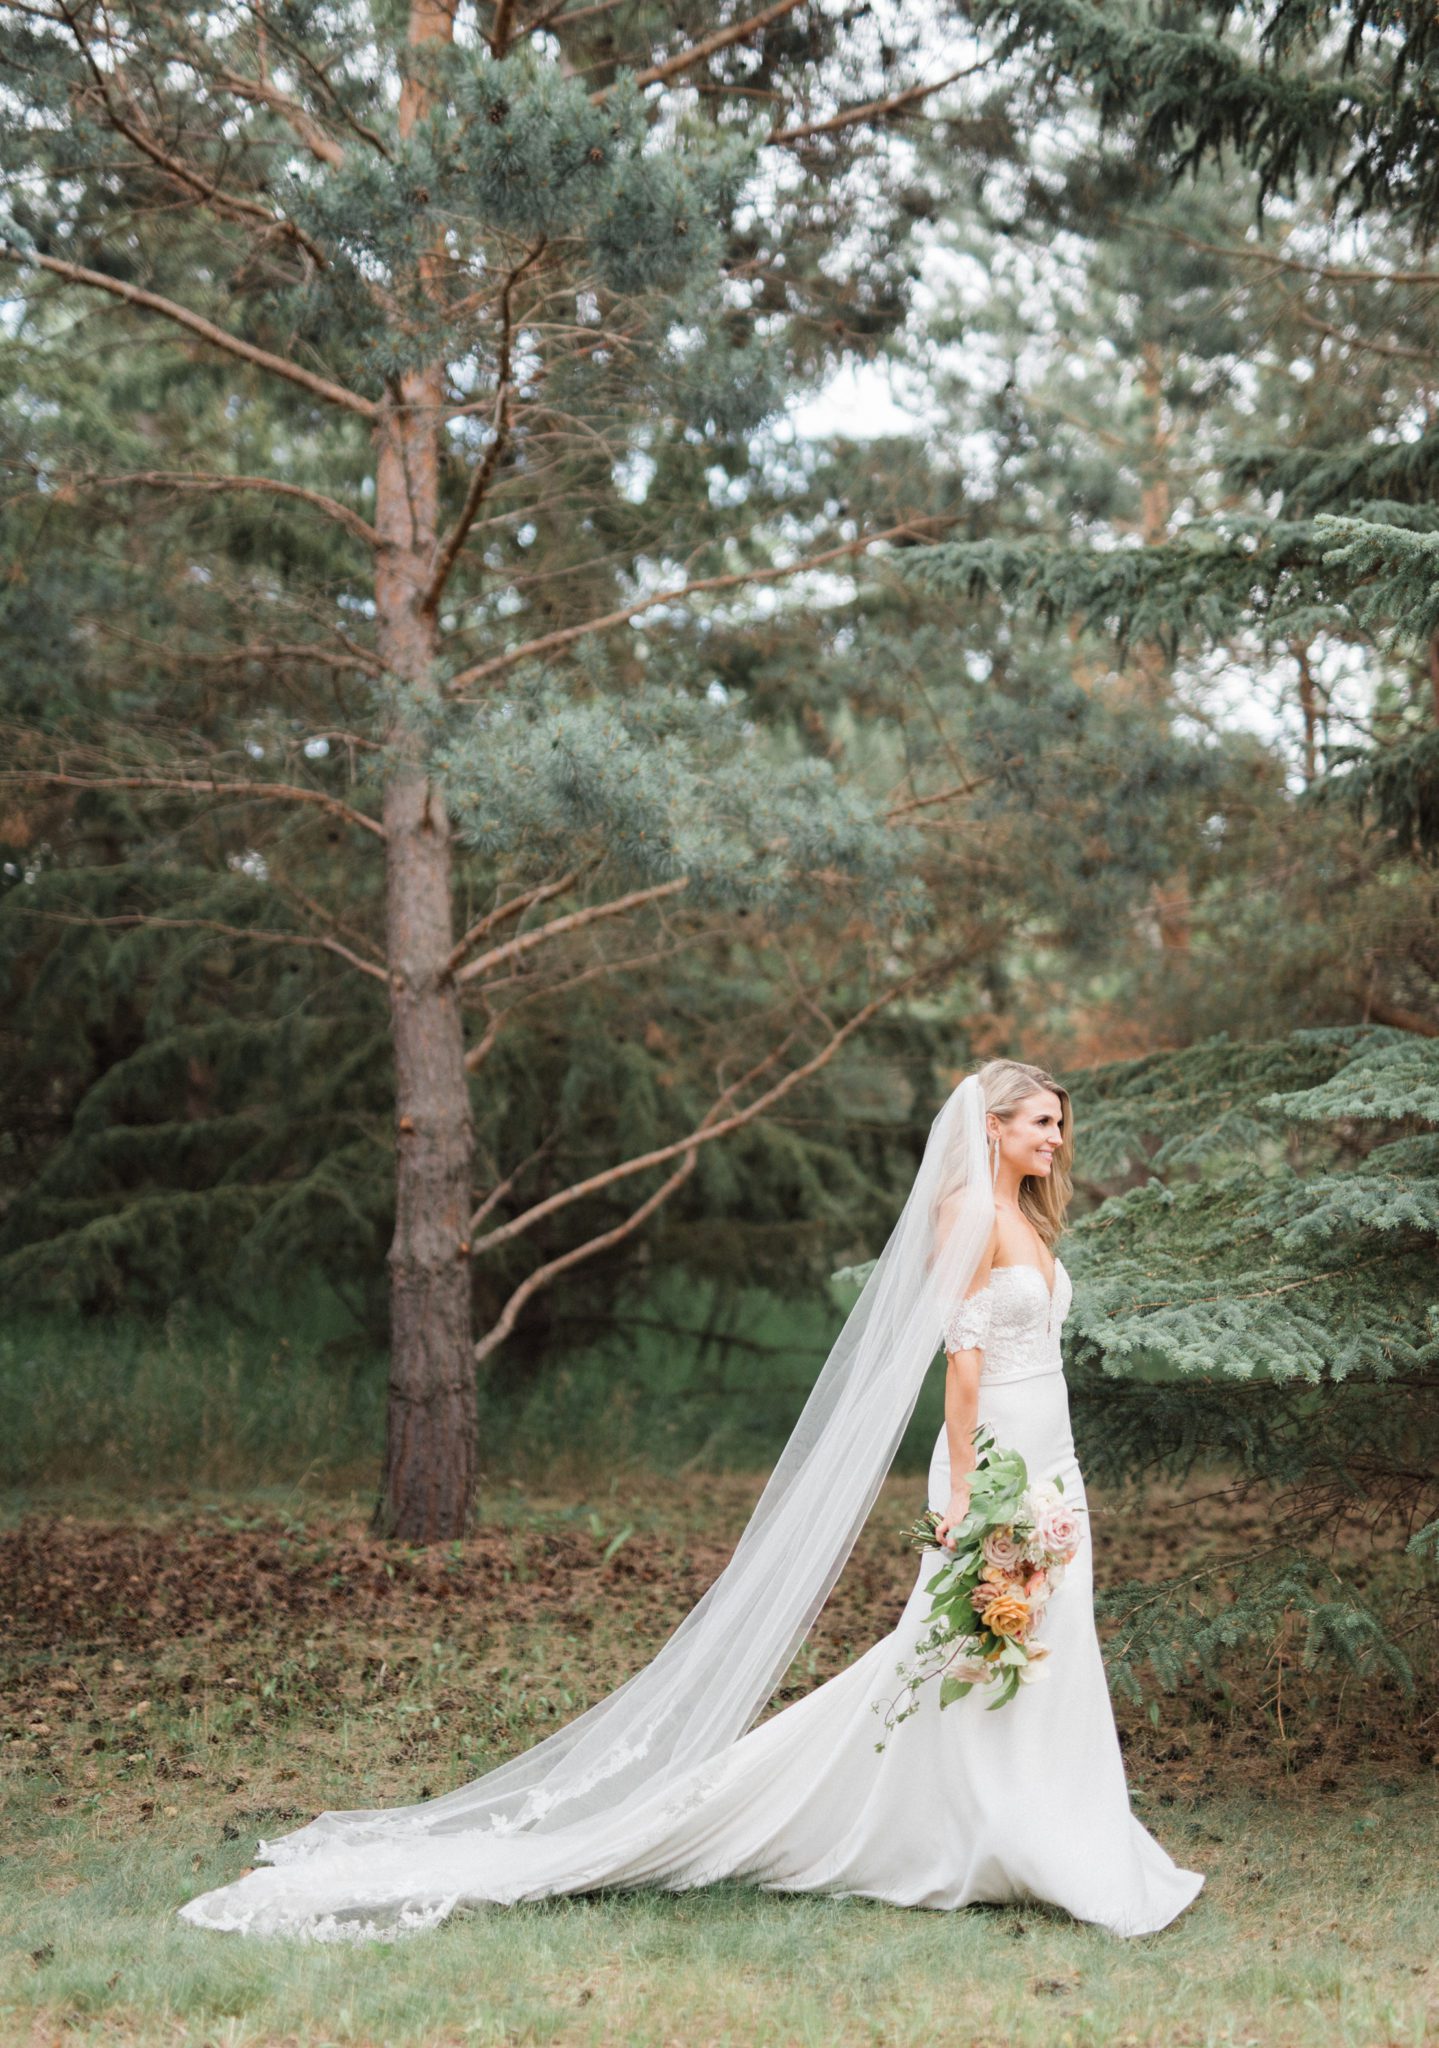 Classically styled bride